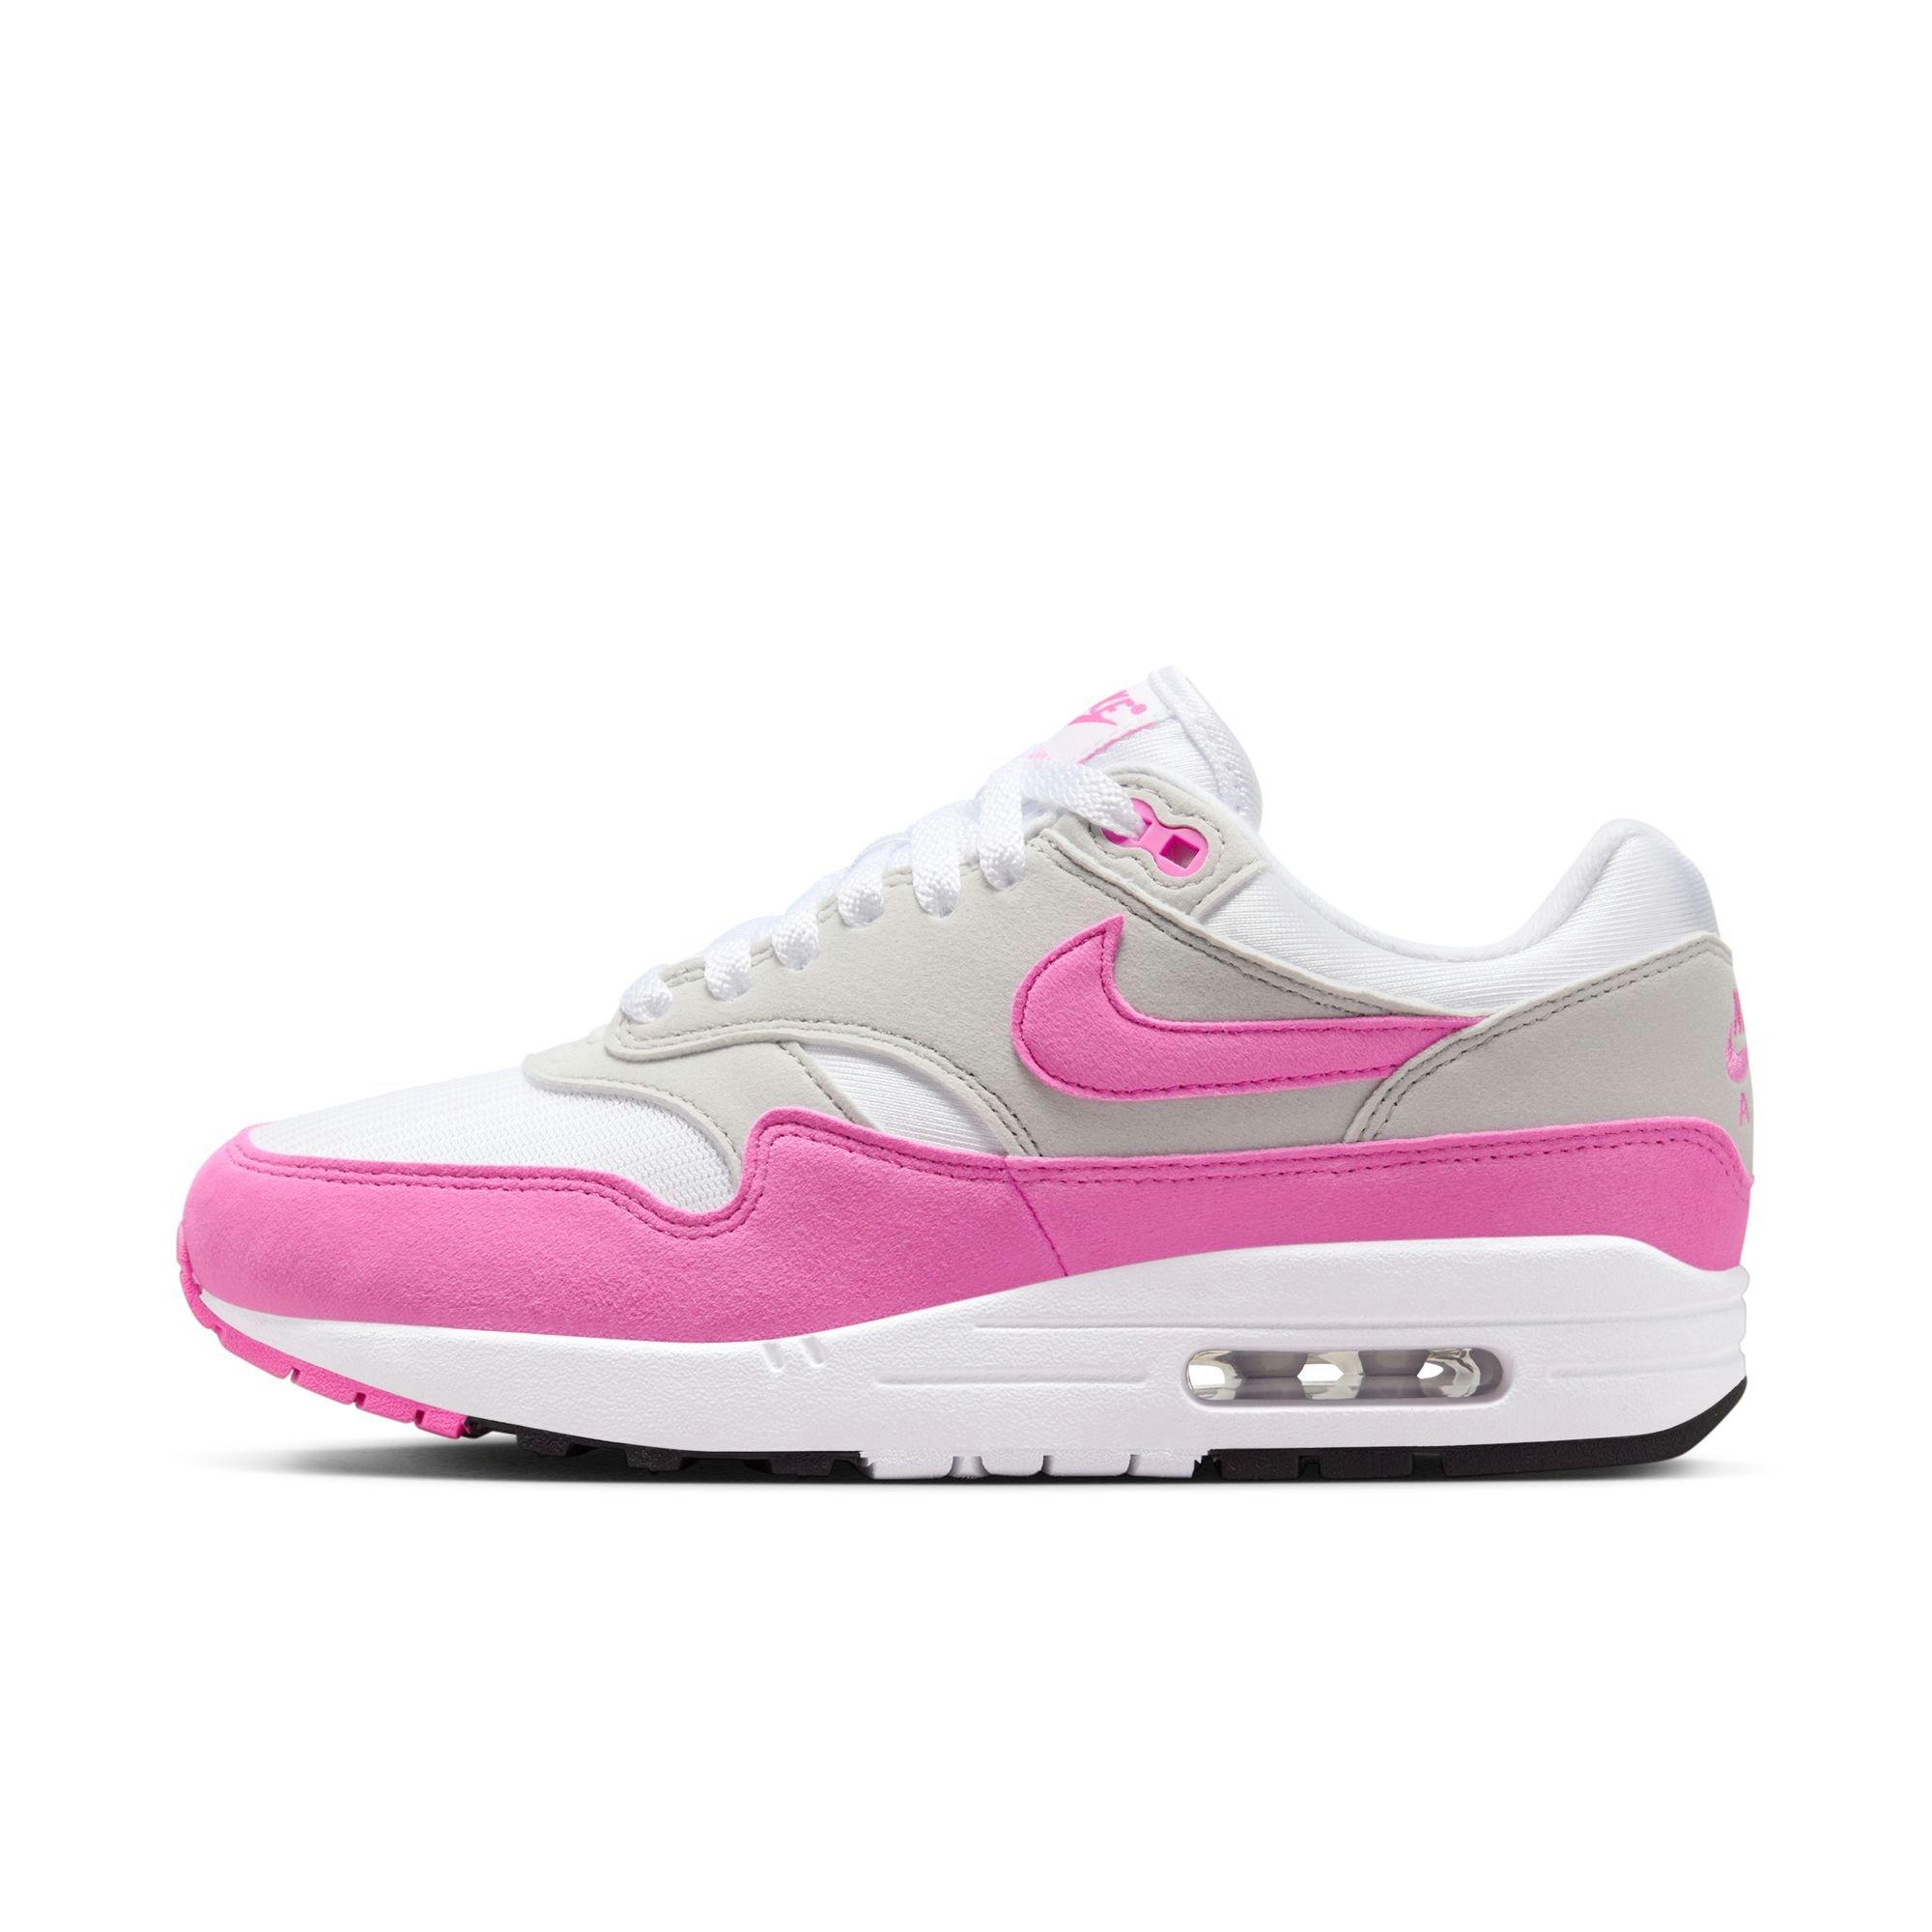 Nike Air Max 95 Psychic Pink (Women's)